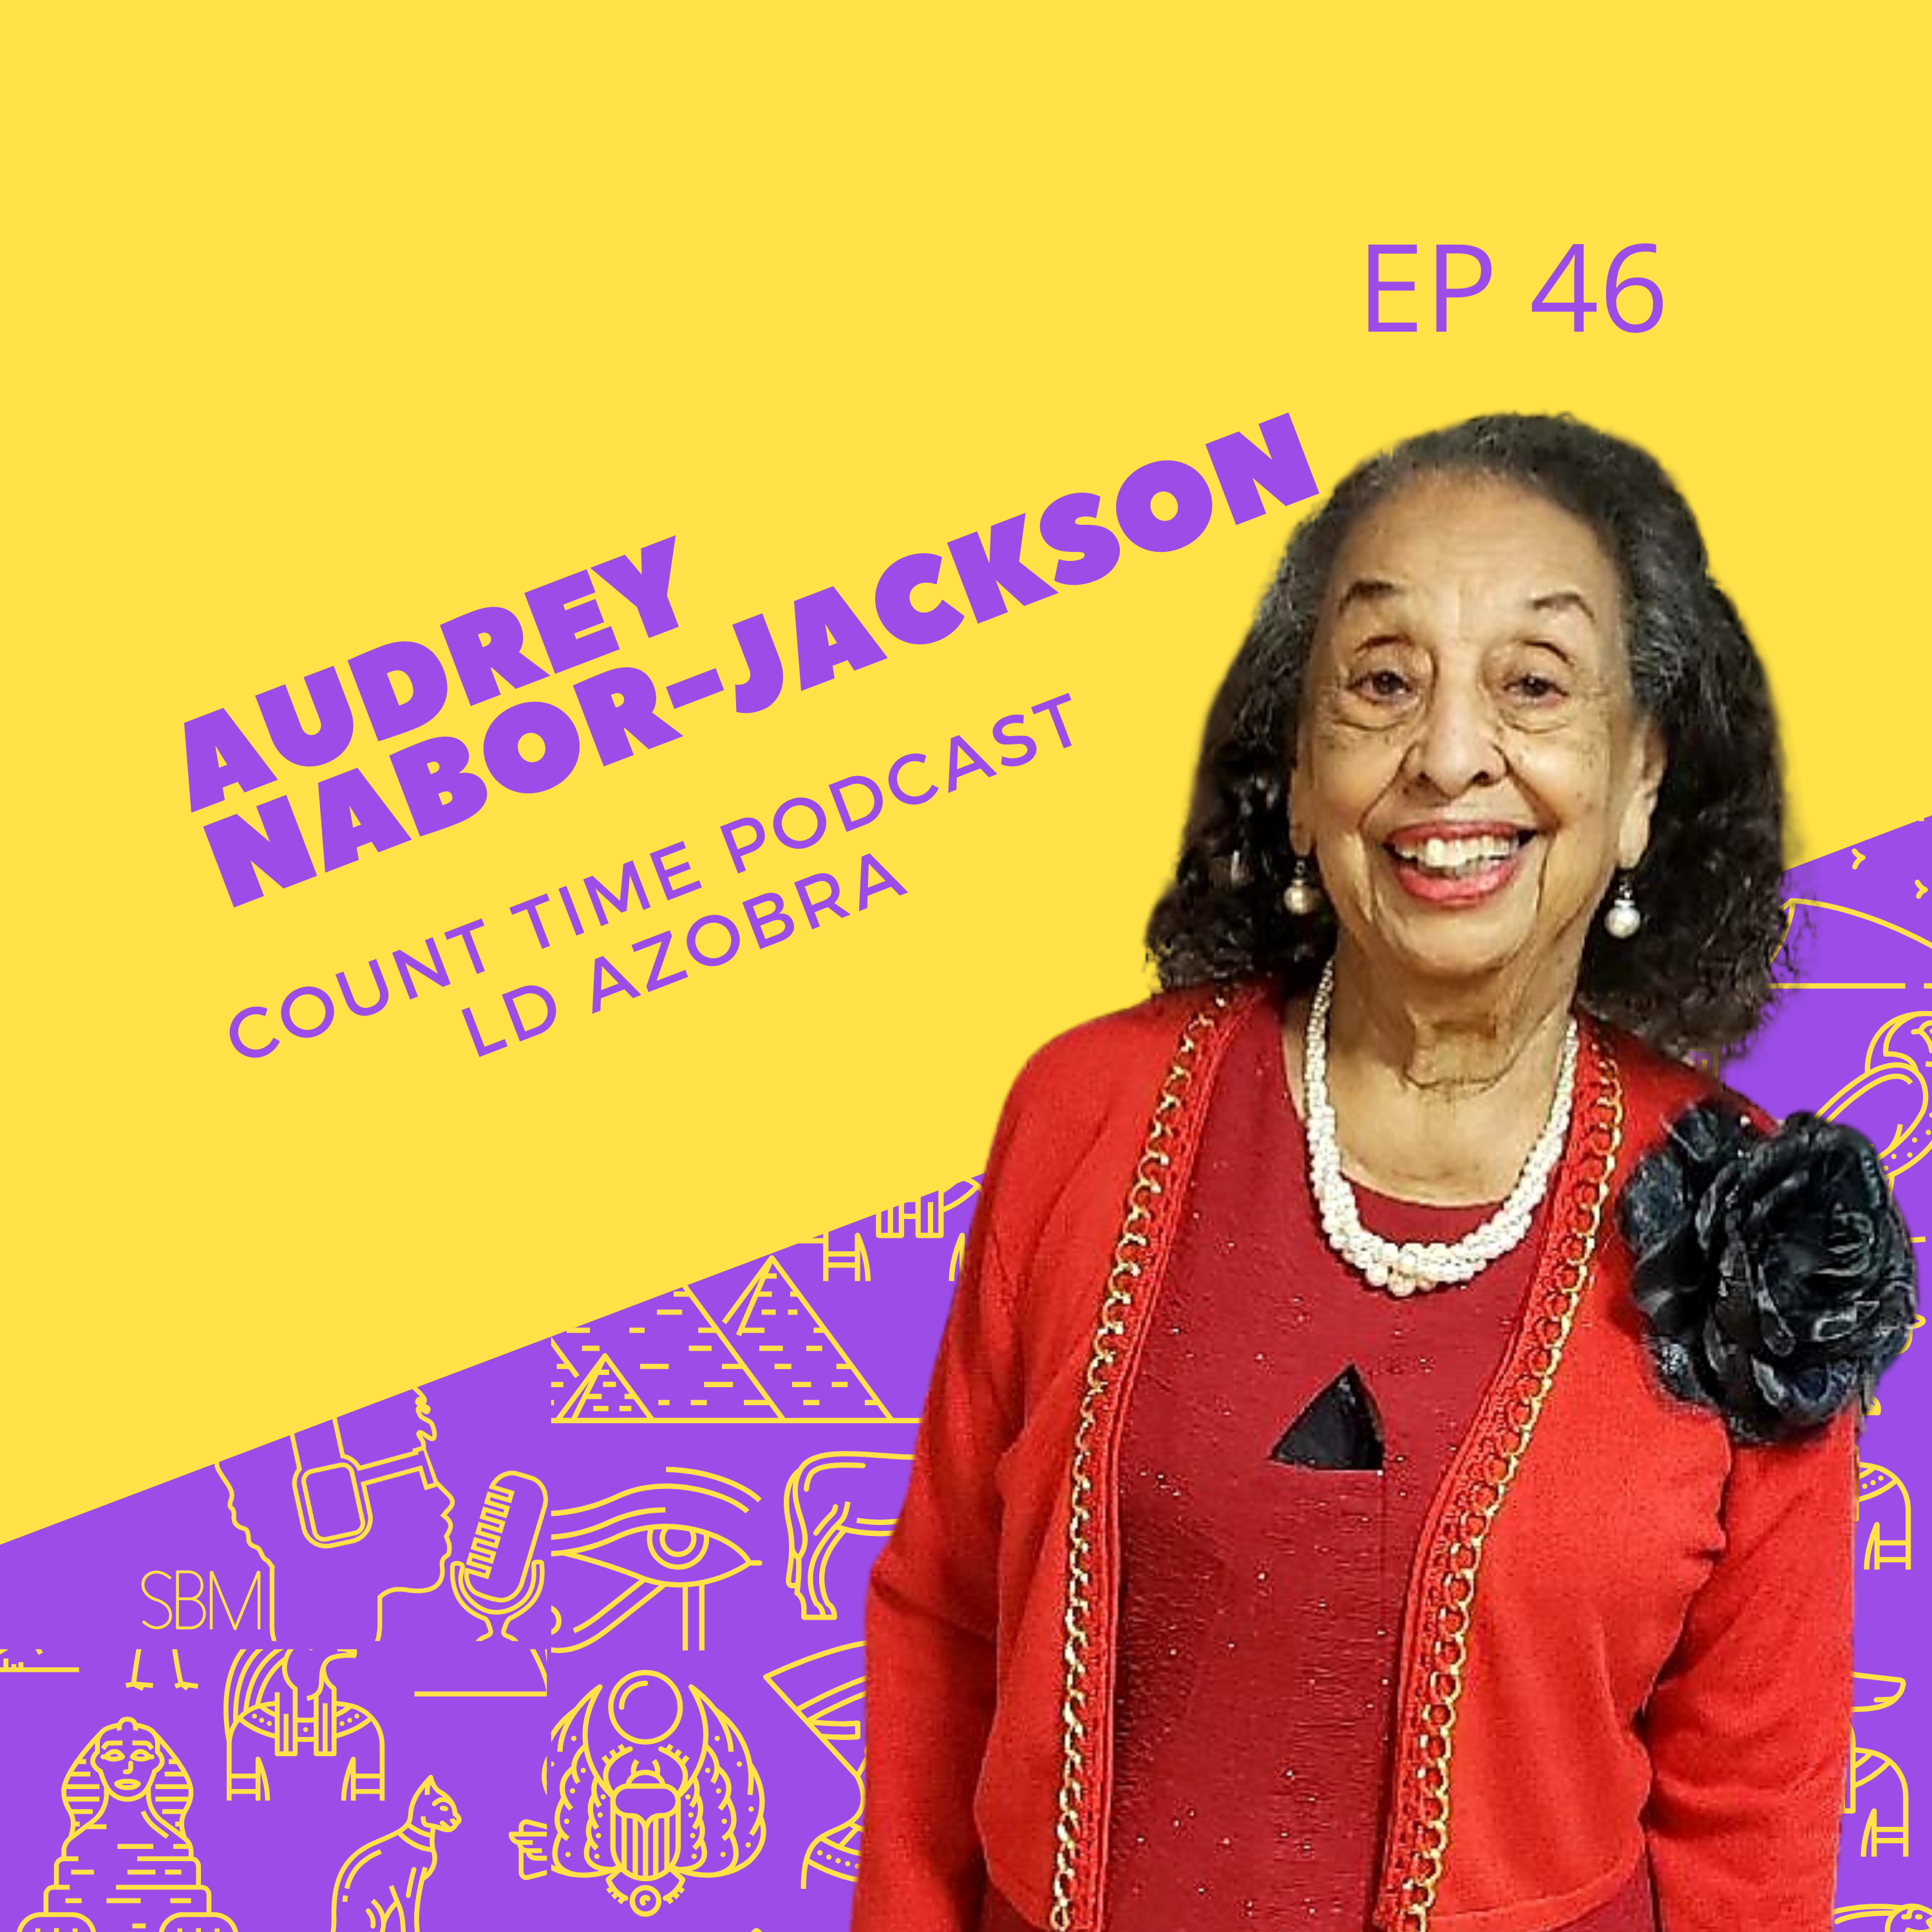 Our 95 year old Living Legend talks life history, and community improvement. Audrey Nabor-Jacksons long life and commitment to community service is exemplary. She discusses politics and change she has been engaged in and witnessed the last 95 years. It is quite a ride described by an extraordinary woman.